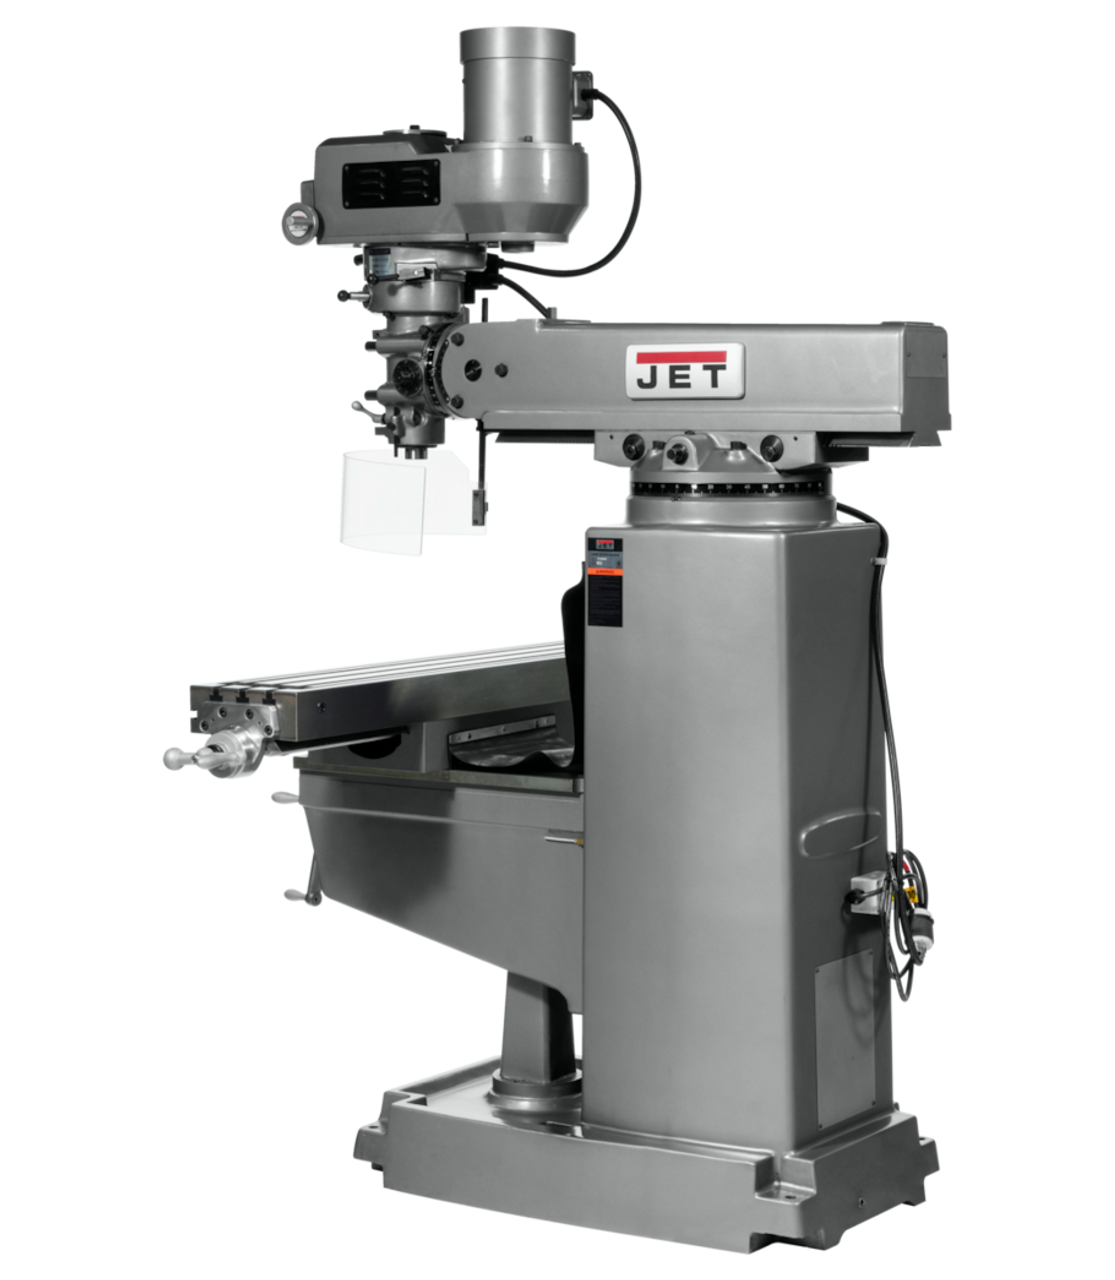 JET JTM-1050VS2 Mill with ACU-RITE 203 DRO with X-Axis Powerfeed 460V